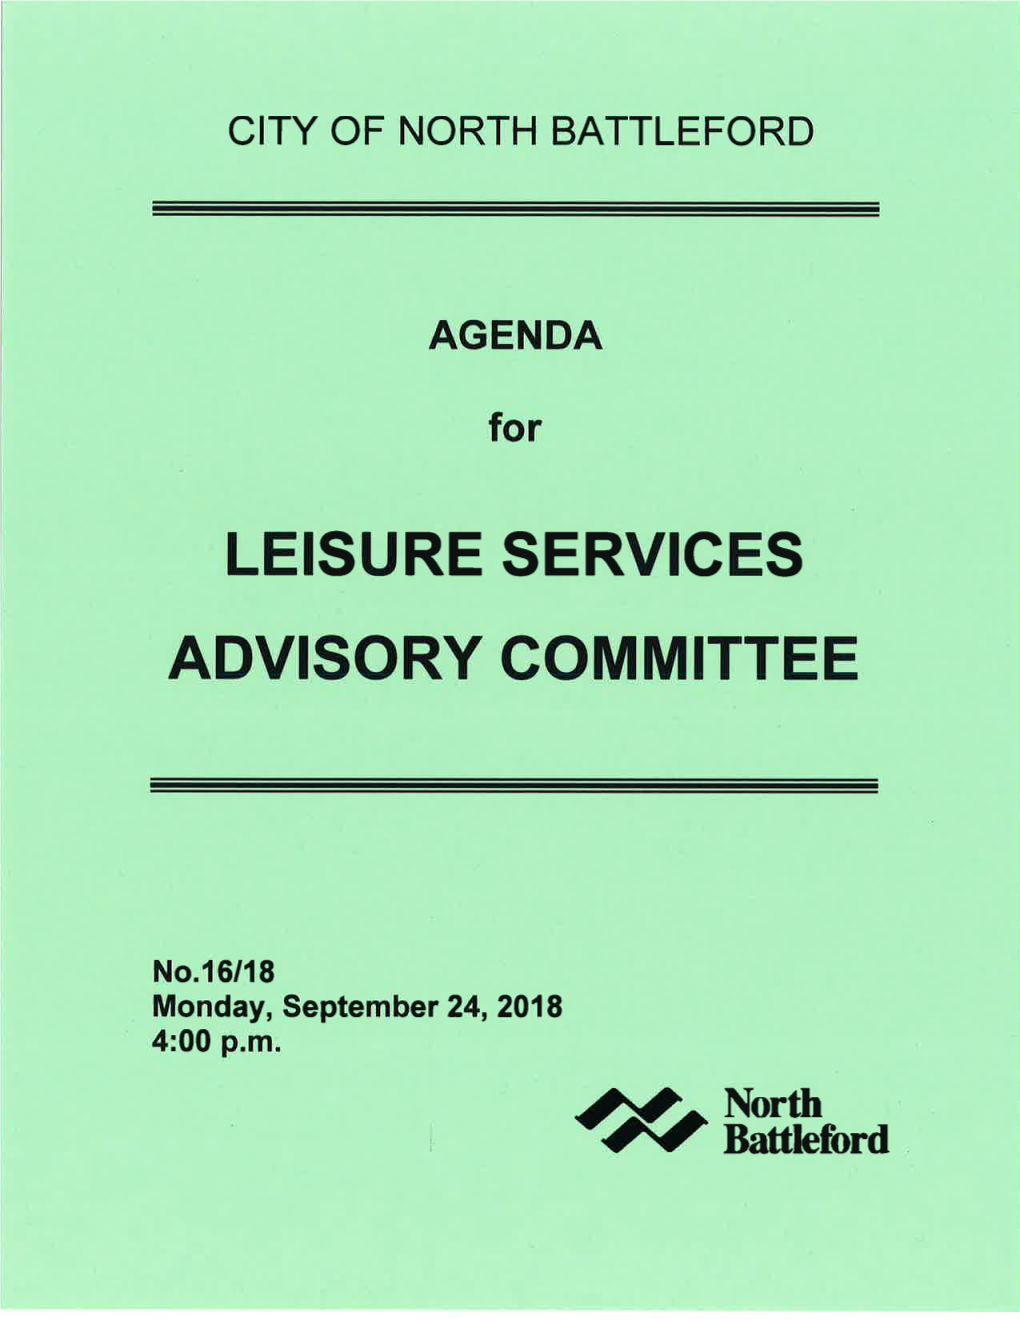 Leisure Services Advisory Committee Meeting No